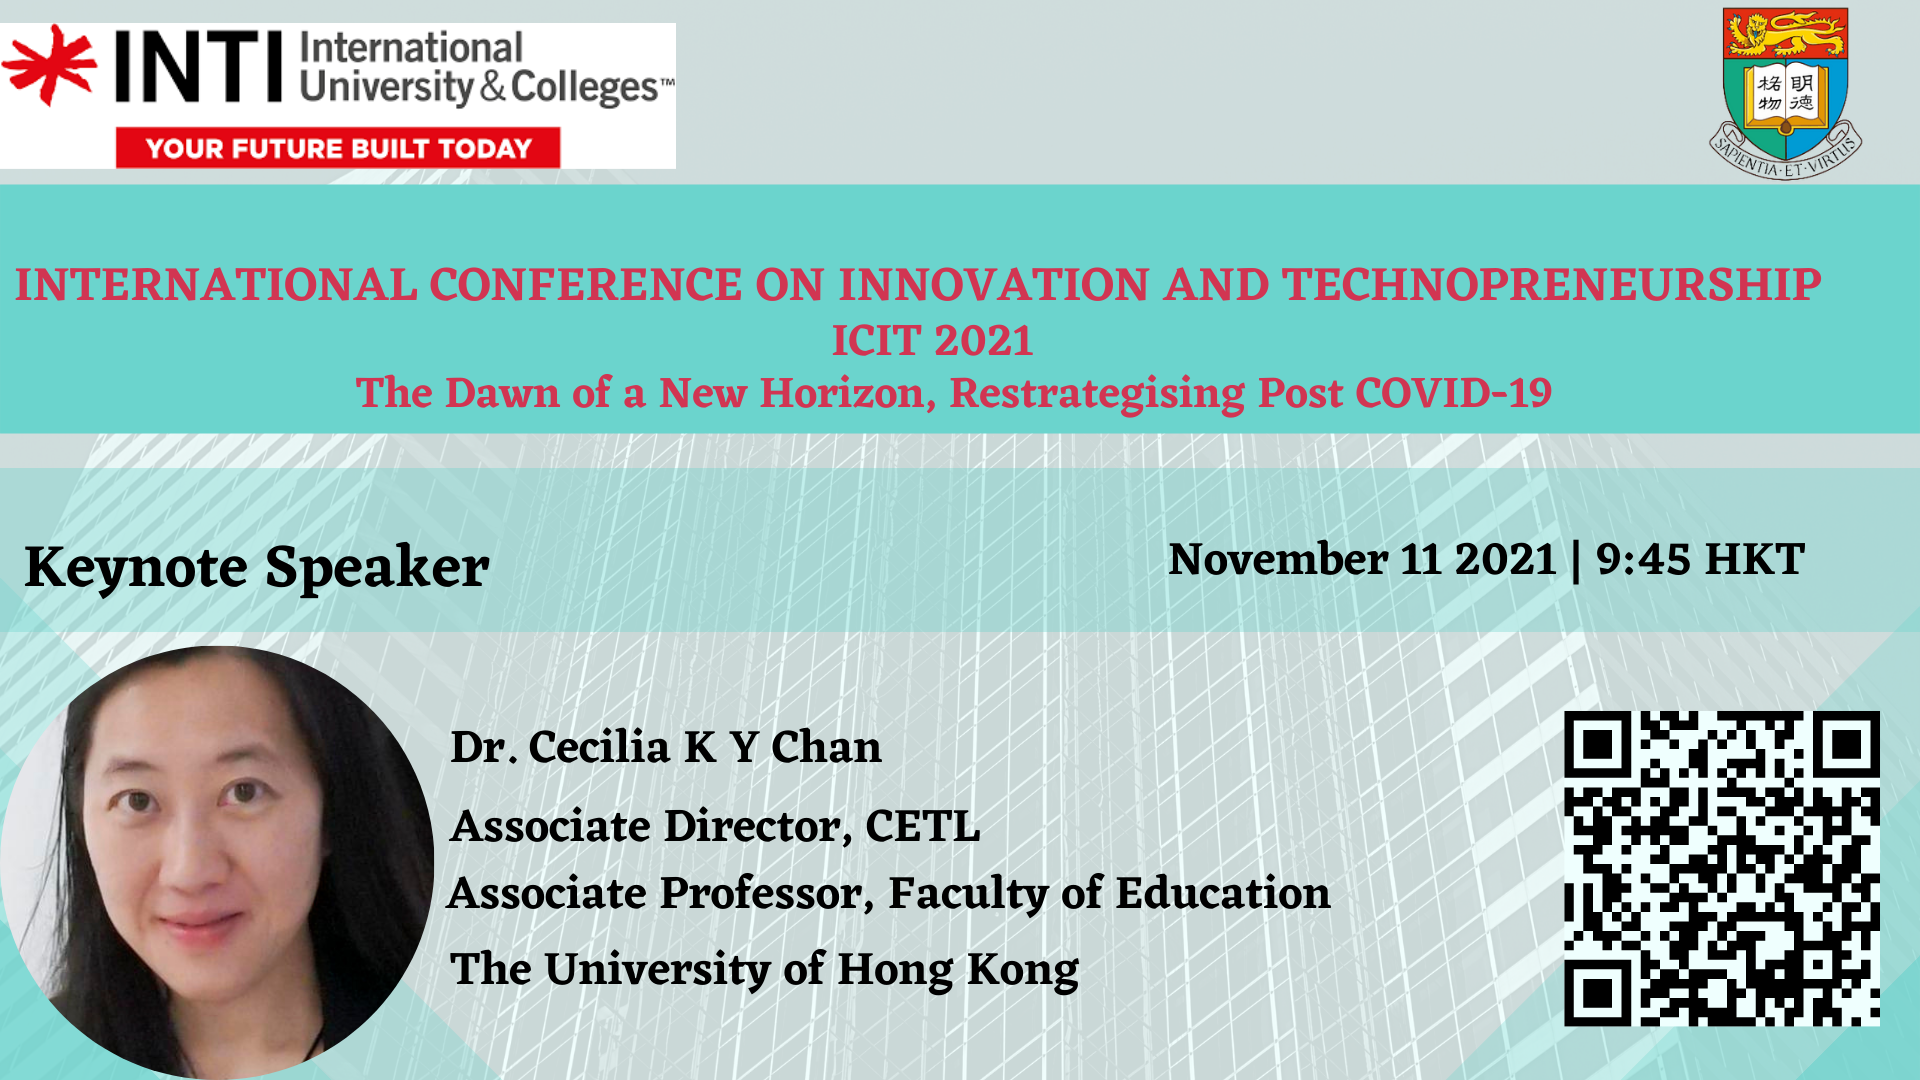 11 November 2021  - Dr. Cecilia Chan has been invited as a Keynote Speaker at ICIT 2021